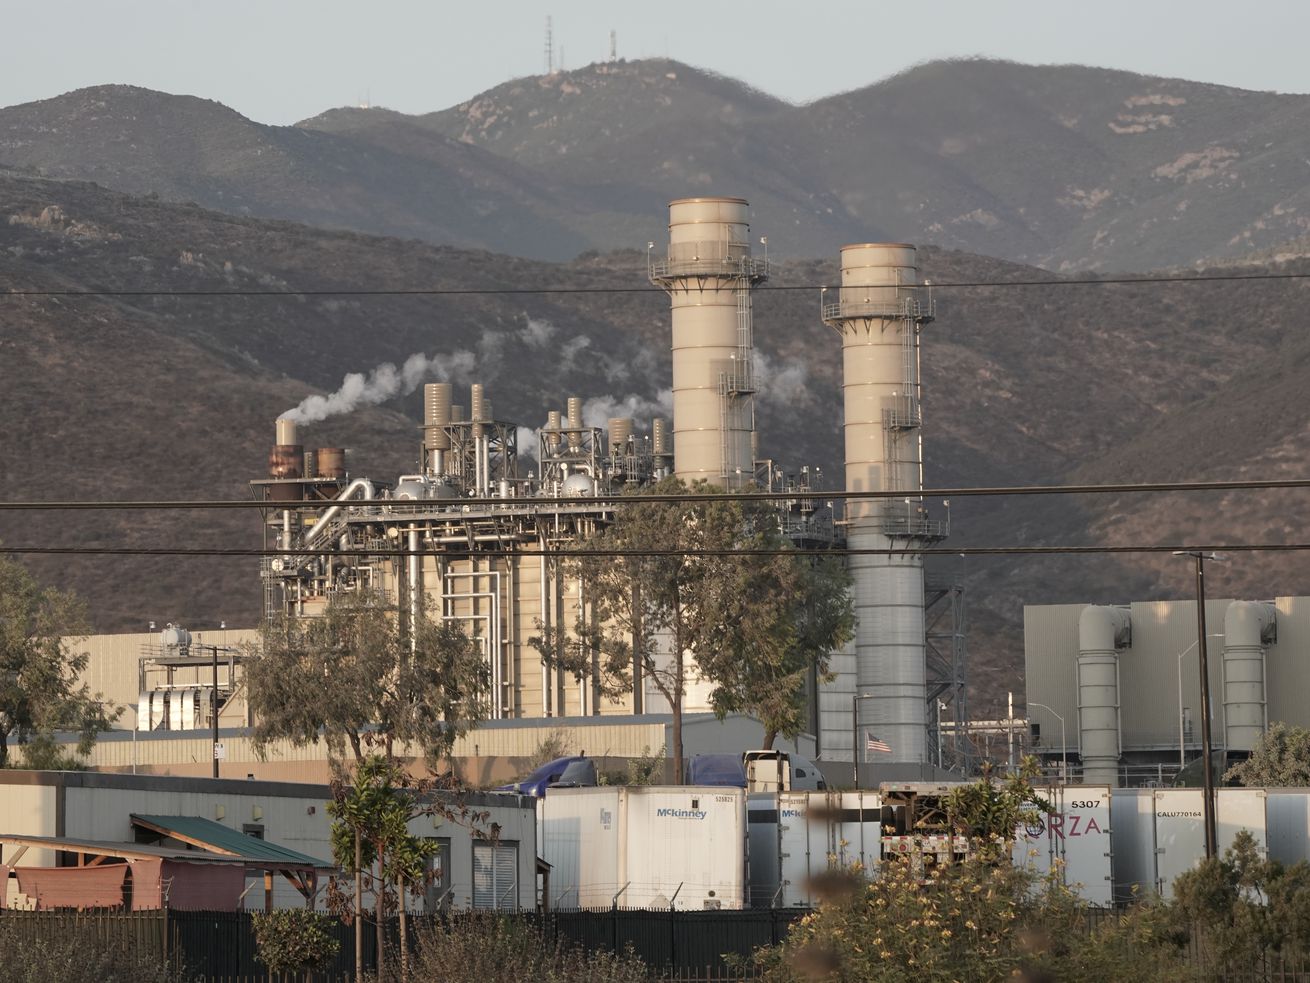 Amid rolling, verdant hills clothed in smog, sit two wide smoke stacks, positioned just to the right of thin metal towers and thinner smokestacks spewing fumes. A tangle of black wires run horizontally across the photo’s foreground.